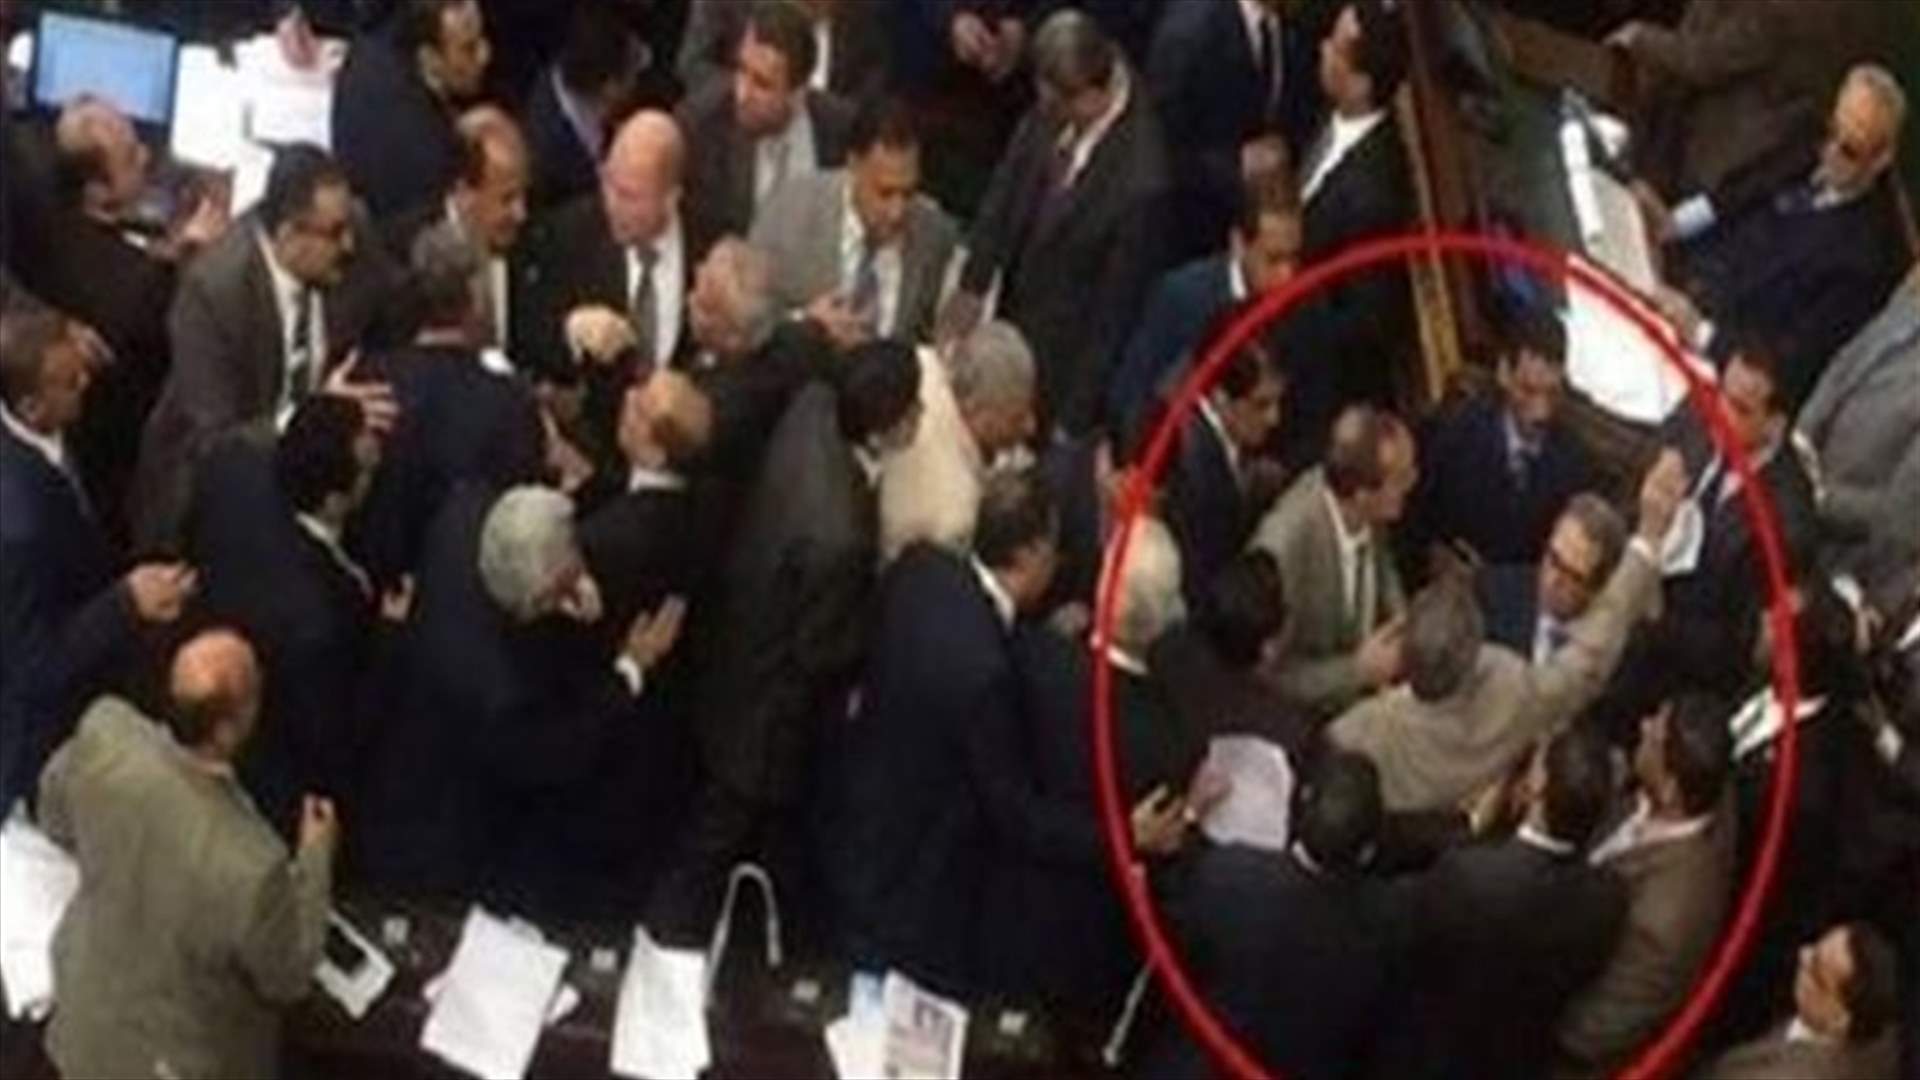 [PHOTO] Egyptian lawmaker attacked with shoe for dining with Israeli ambassador